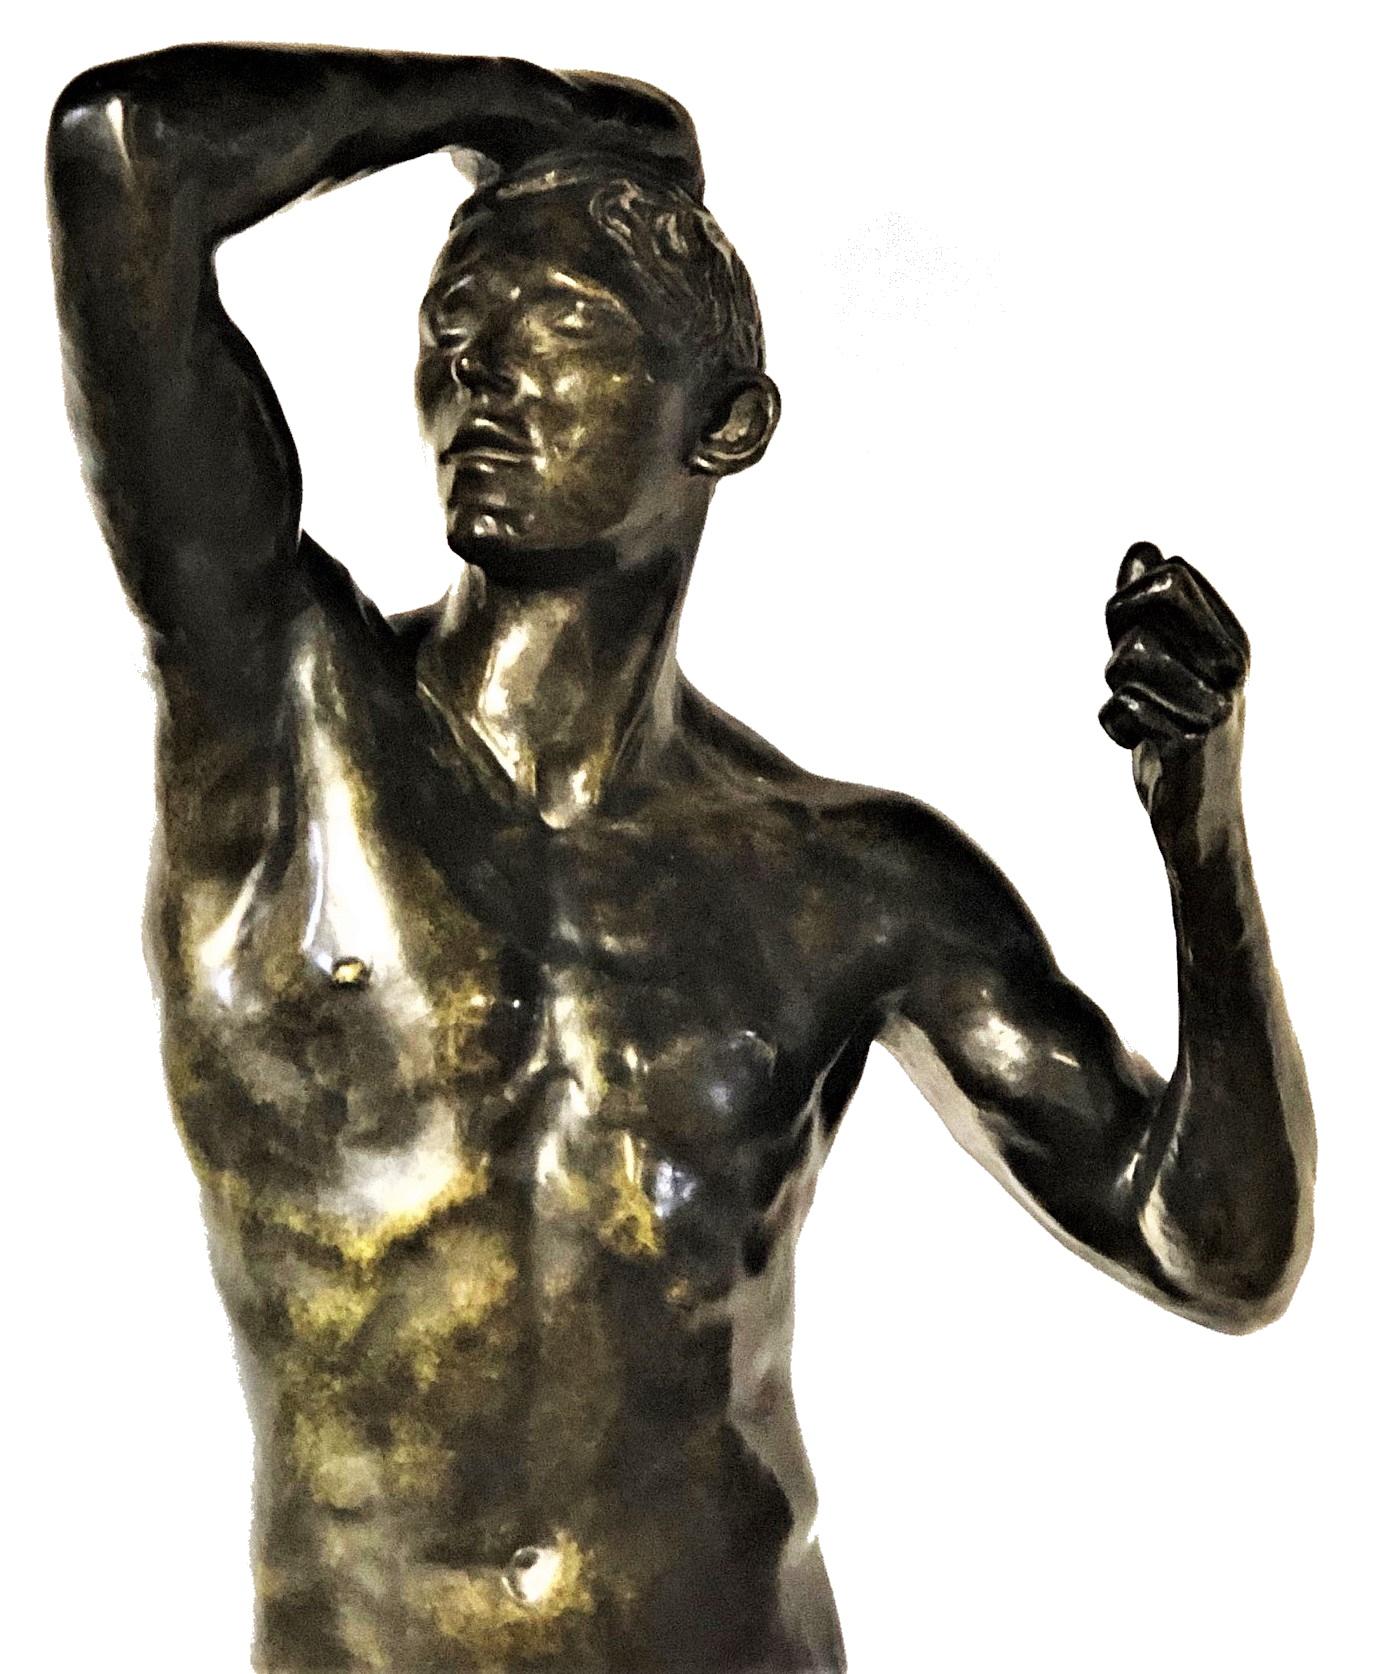 Auguste Rodin
Age of Bronze
Patinated Bronze Sculpture Re-Cast
XX Century

ABOUT THE ARTWORK
Rodin's breakout sculpture, The Age of Bronze (L'Age d'airain) caused a critical scandal for its extreme naturalism and ambiguous subject matter. Fashioned